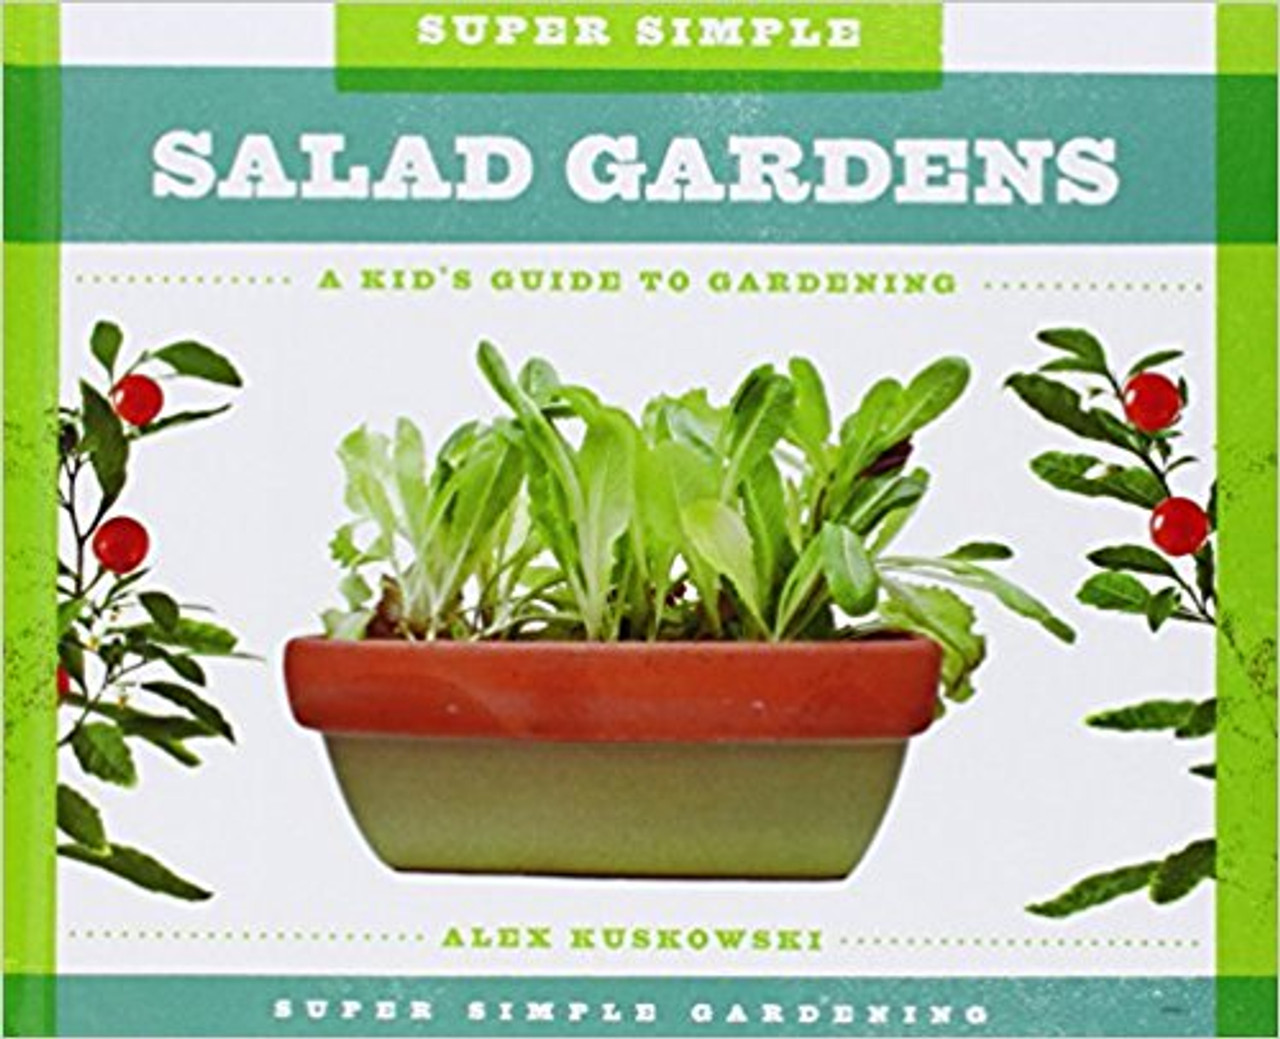 Super Simple Salad Gardens: A Kid's guide to Gardening (Hard Cover) by Alex Kuskowski